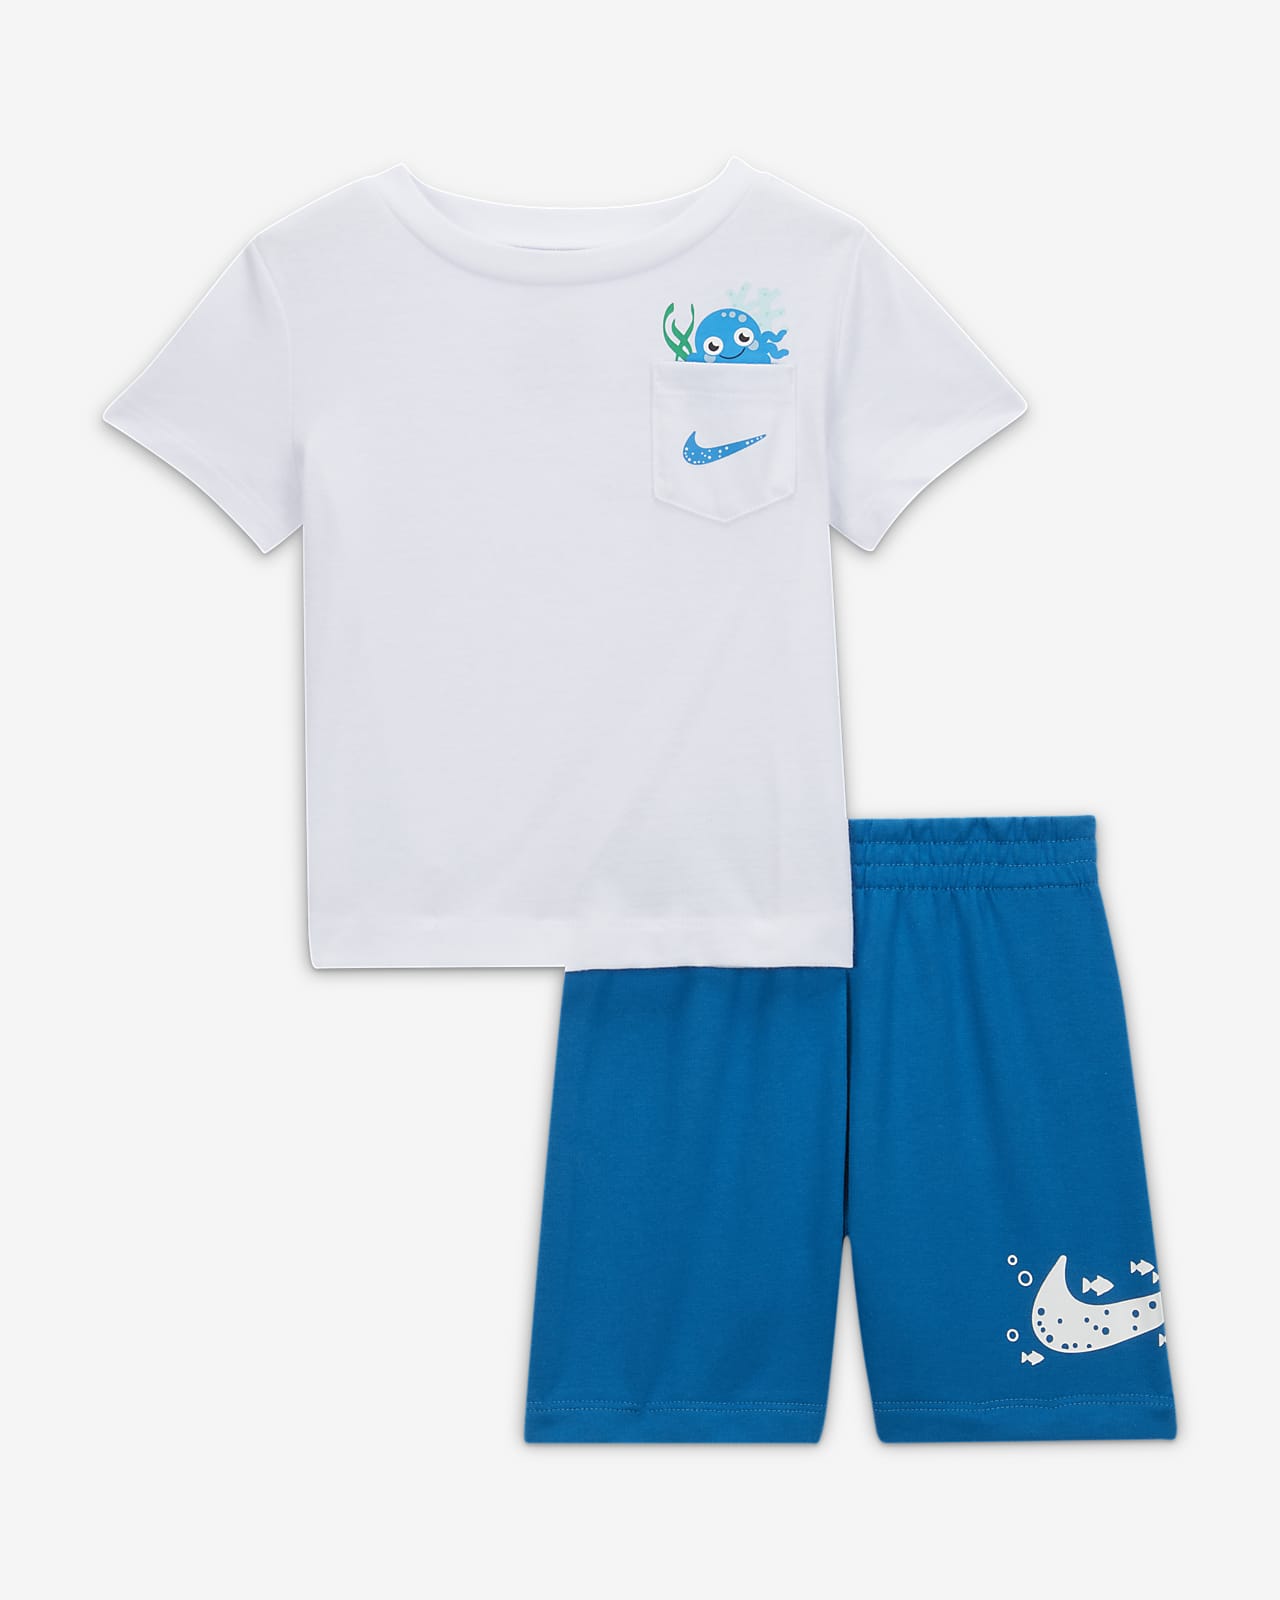 https://static.nike.com/a/images/t_PDP_1280_v1/f_auto,q_auto:eco/80b29b15-8b0f-4c29-8c63-89c6b66ea46b/sportswear-coral-reef-jersey-tee-and-shorts-set-2-piece-set-10B4CR.png